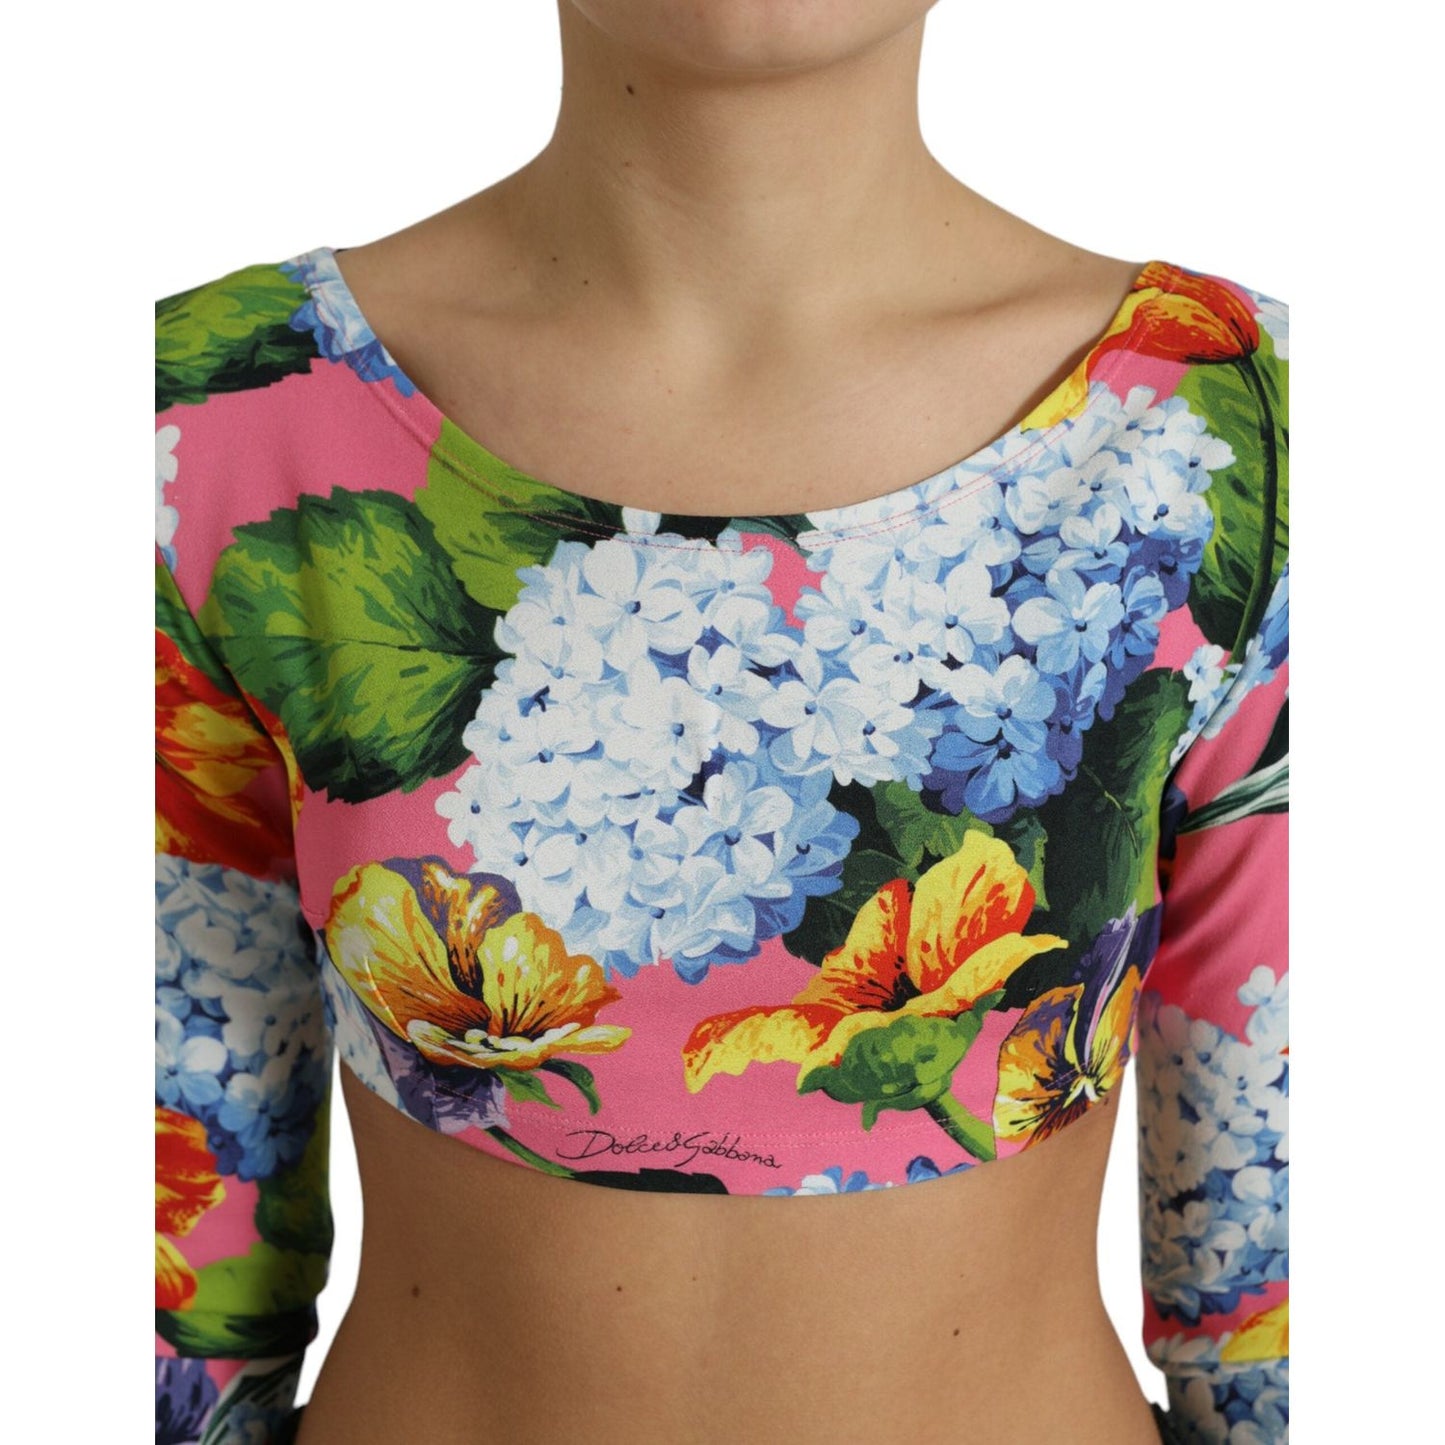 Dolce & Gabbana Floral Elegance Cropped Blouse multicolor-floral-long-sleeves-cropped-top-2